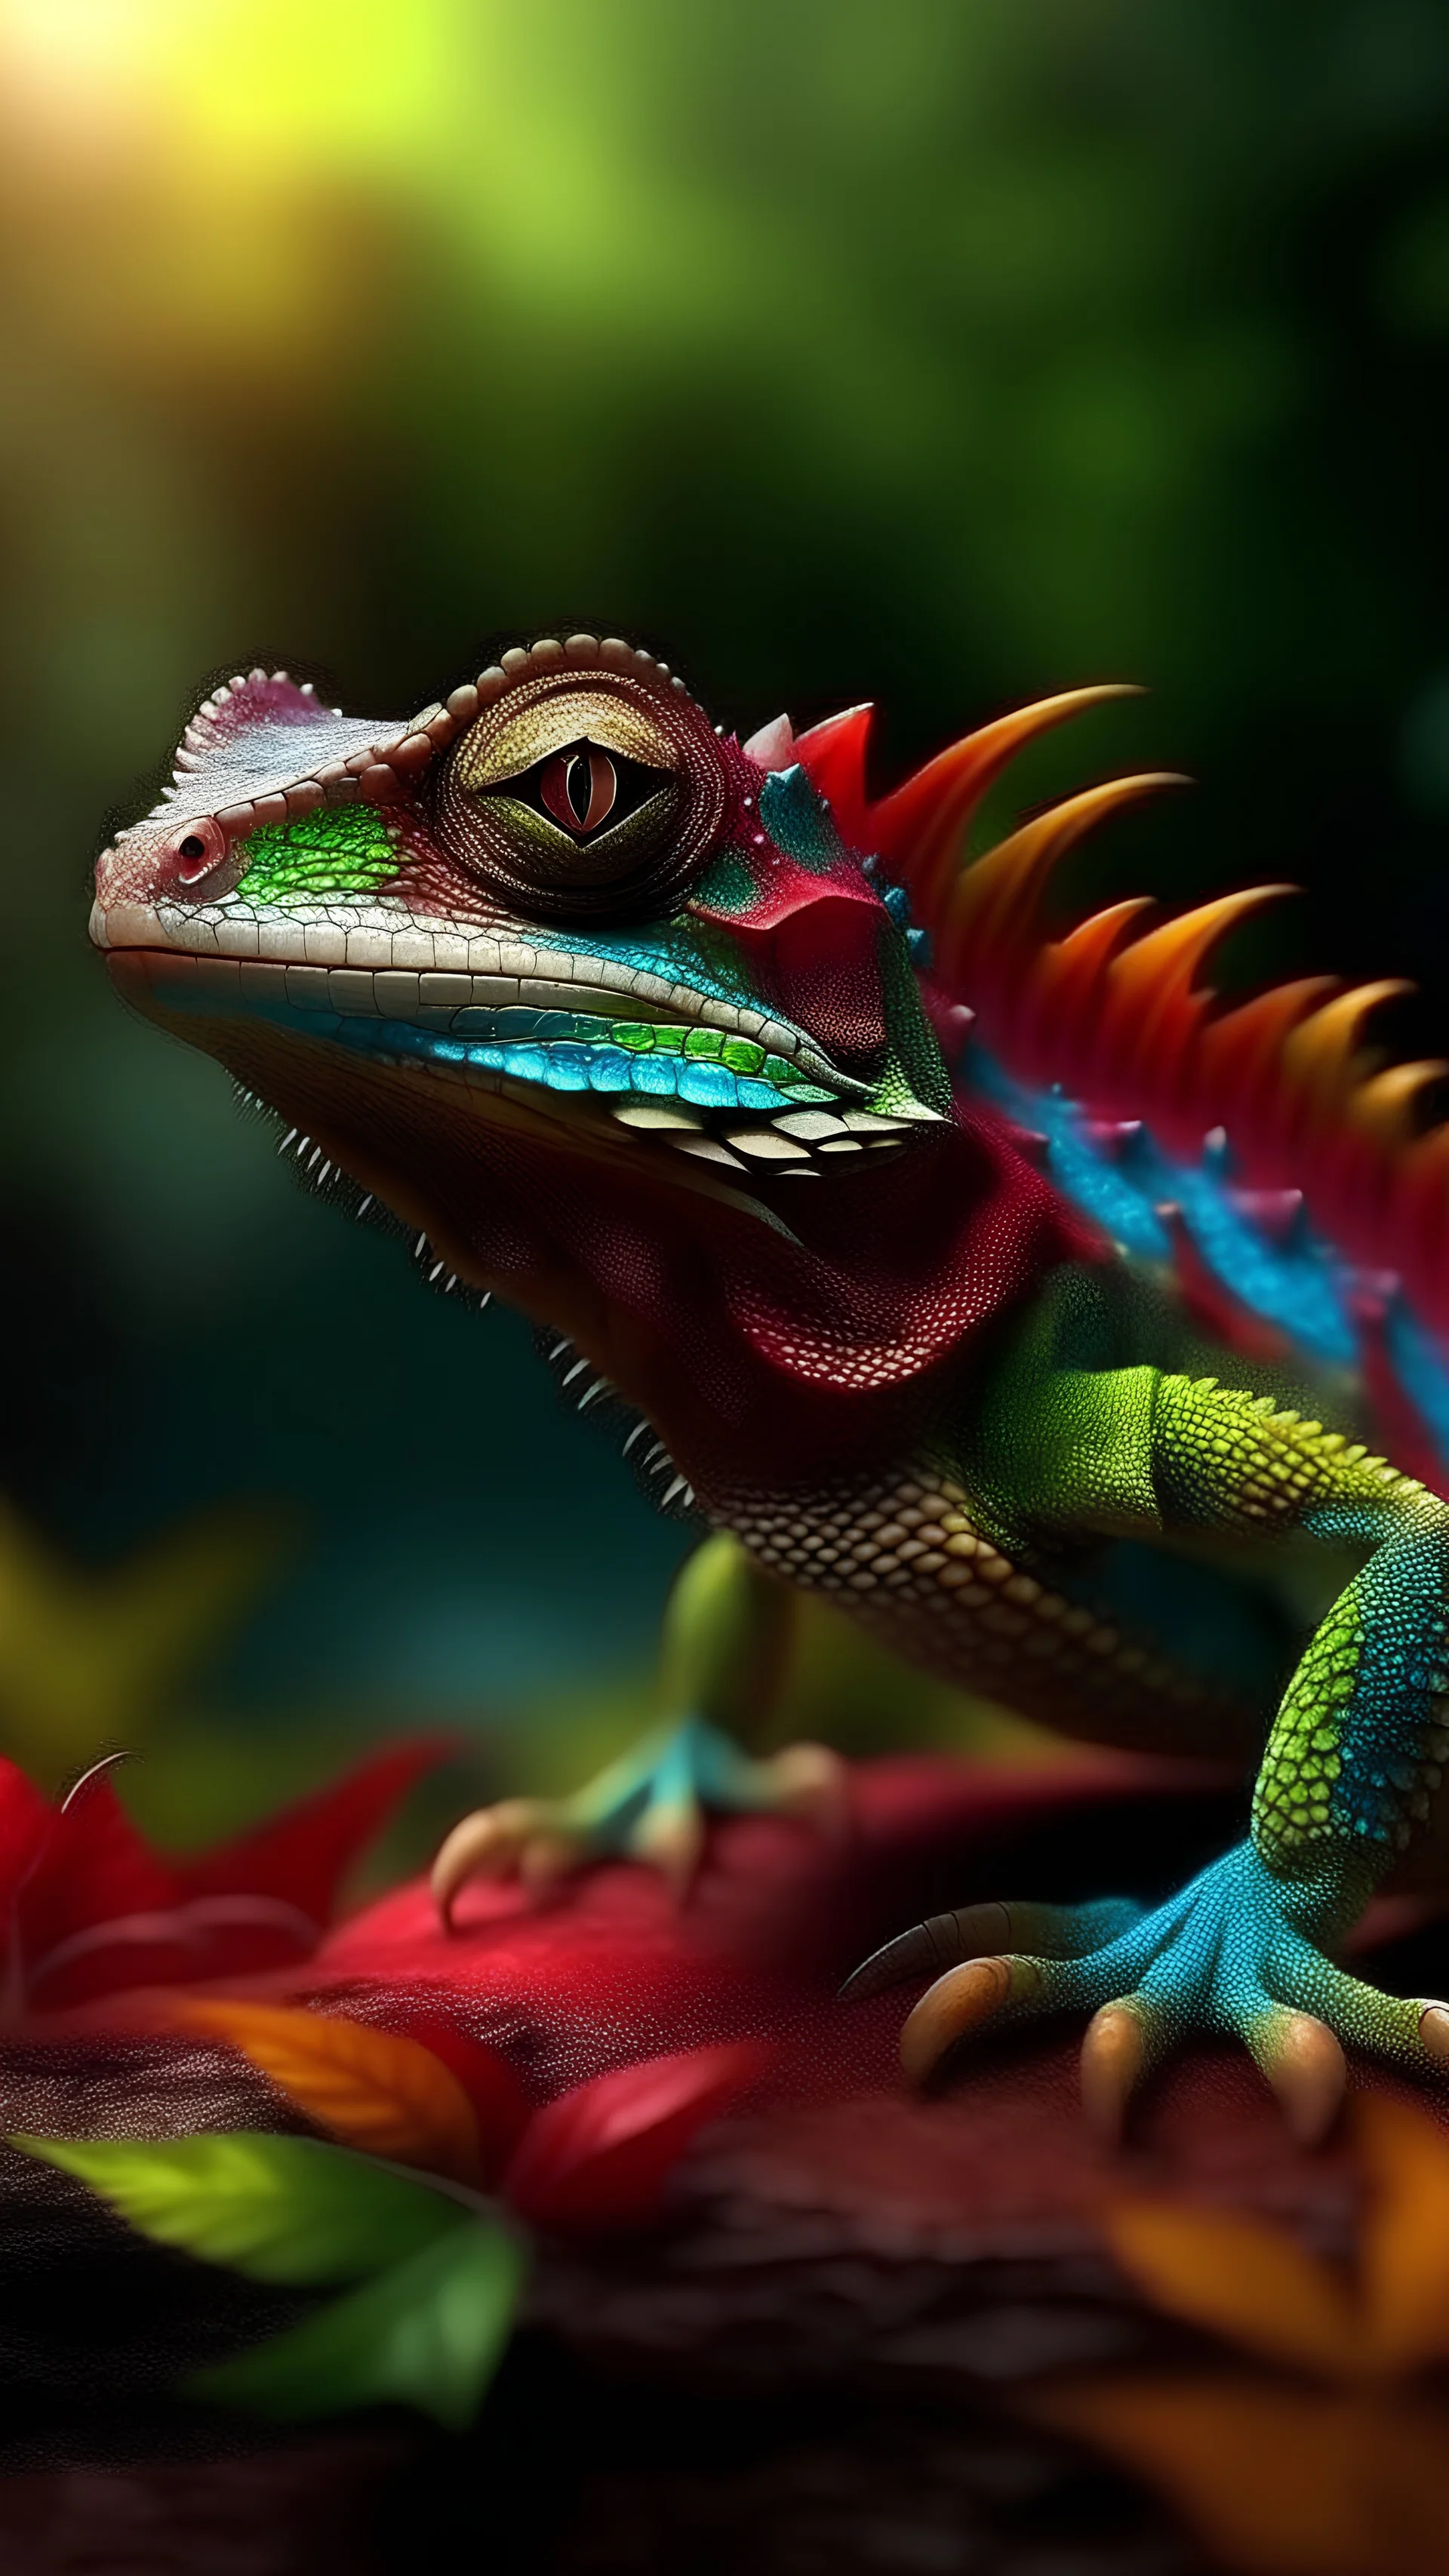 Create a cartoon fantasy photograph of a lizard-like creature in an unfamiliar world. Emphasize the creature’s sharp features, making them stand out prominently. Infuse the scene with an unsettling atmosphere, evoking a sense of discomfort. Make the background extremely vibrant and colourful with all darker tones of all colours.